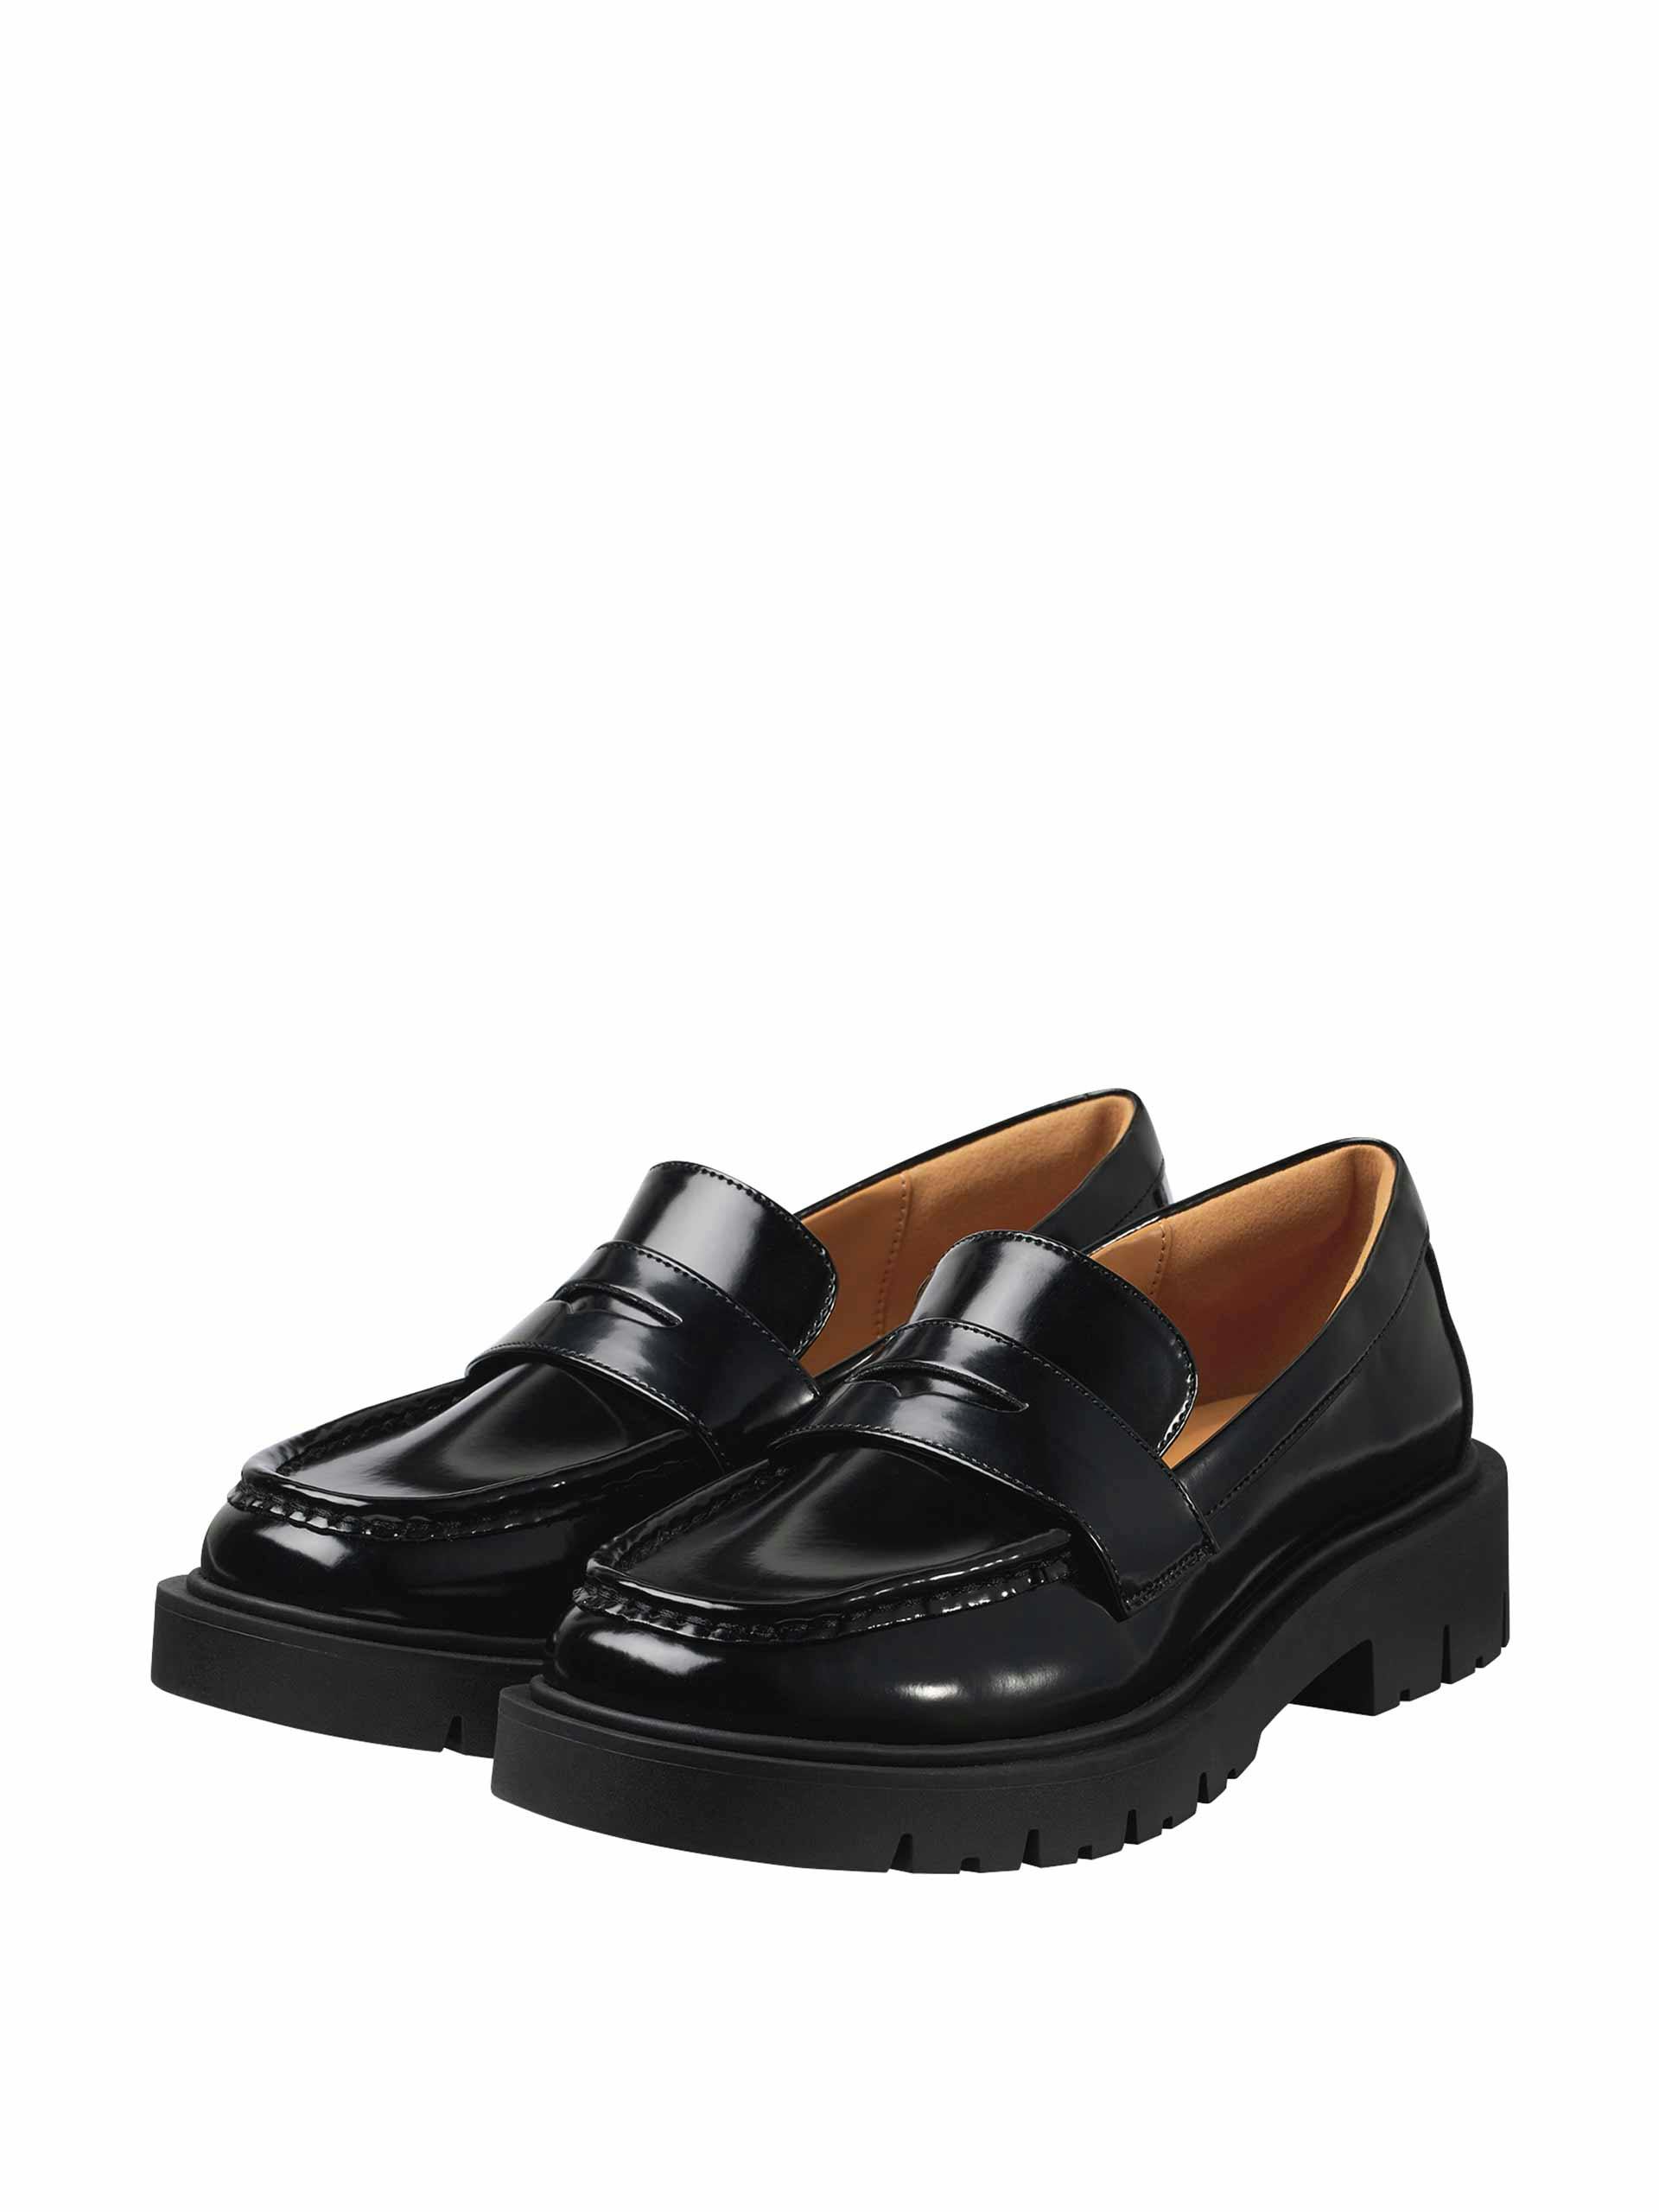 Black glossy loafers